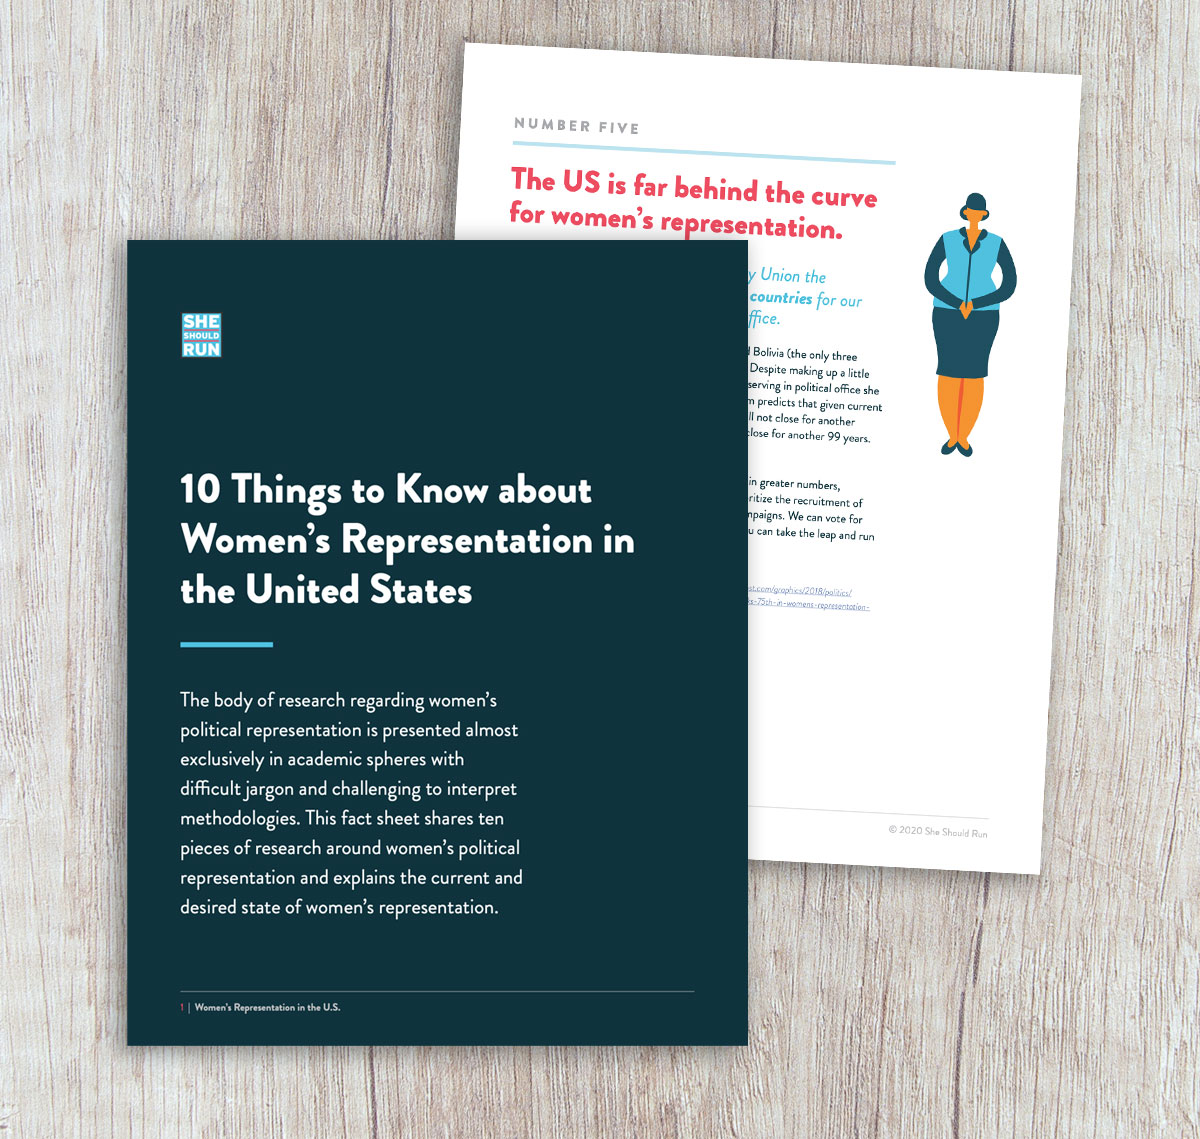 10 Things to Know about Women’s Representation in the United States